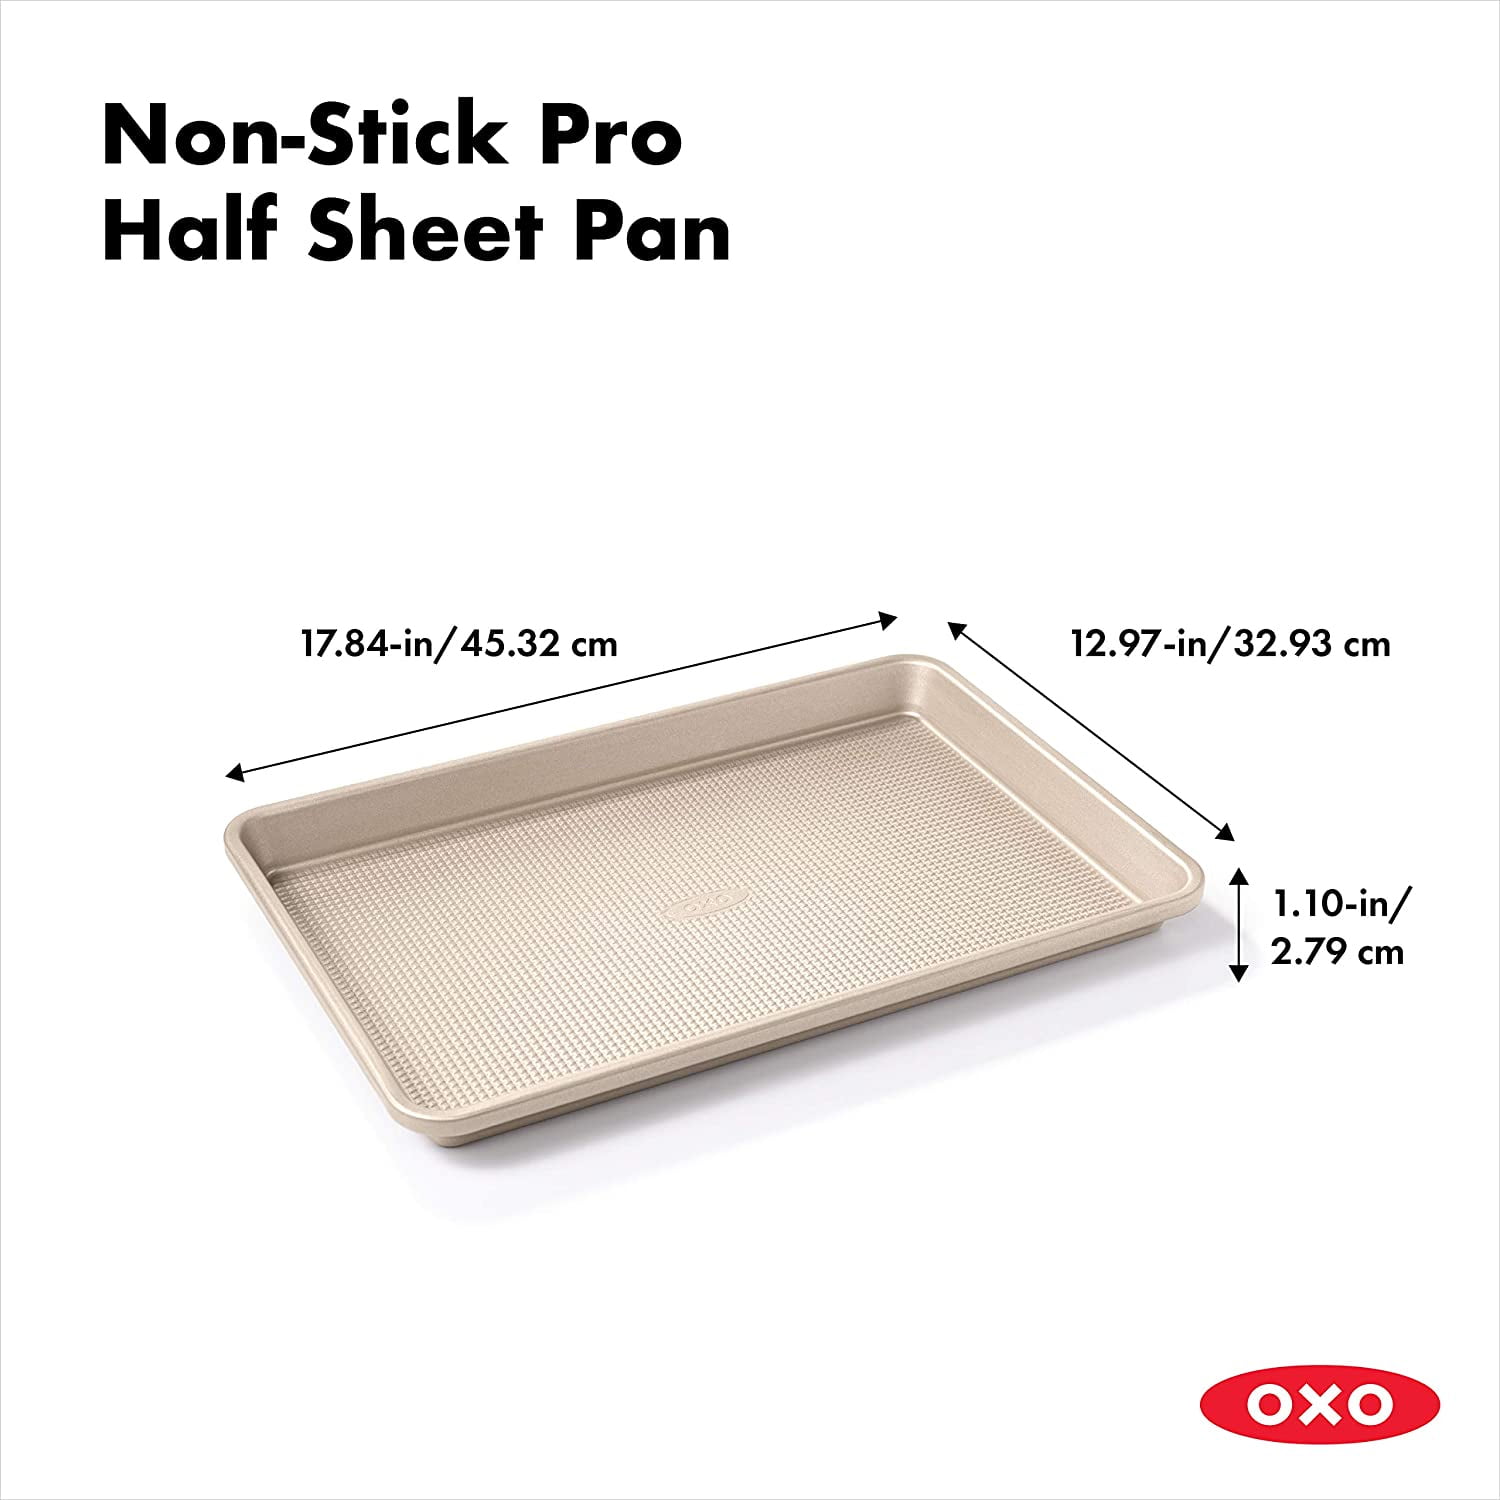 Reviews for OXO Good Grips Non-Stick Pro 13 in. x 18 in. Half